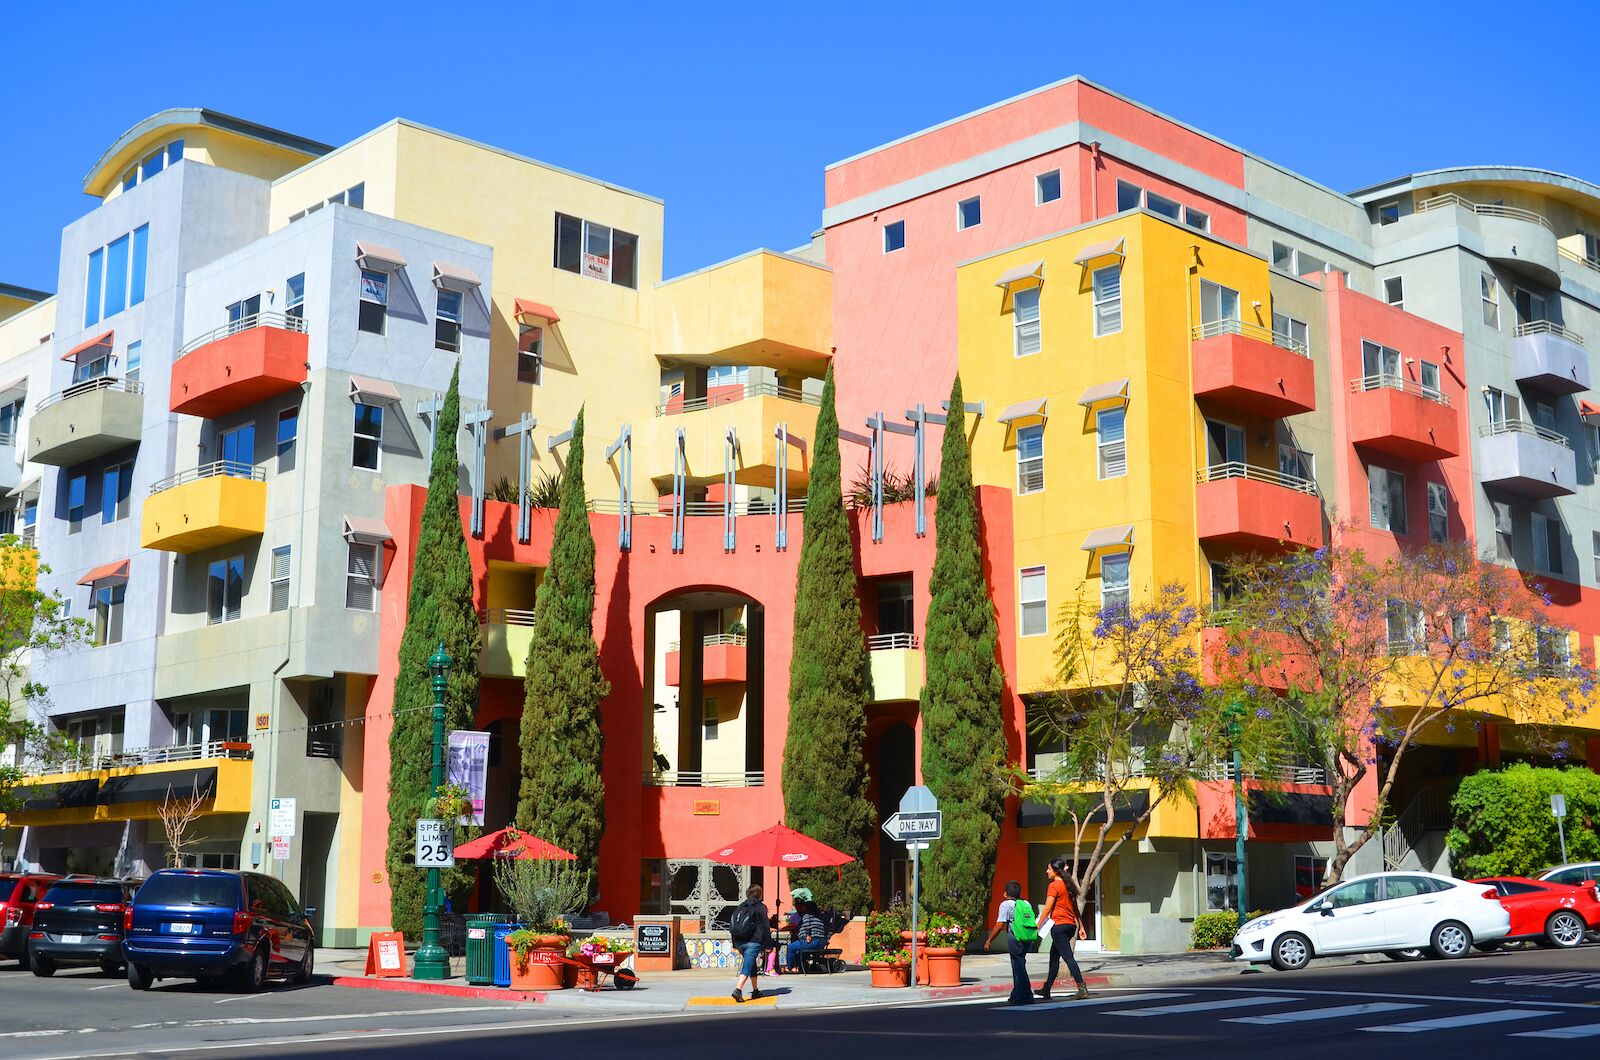 A neighborhood with colorful apartments in Little Italy San Diego